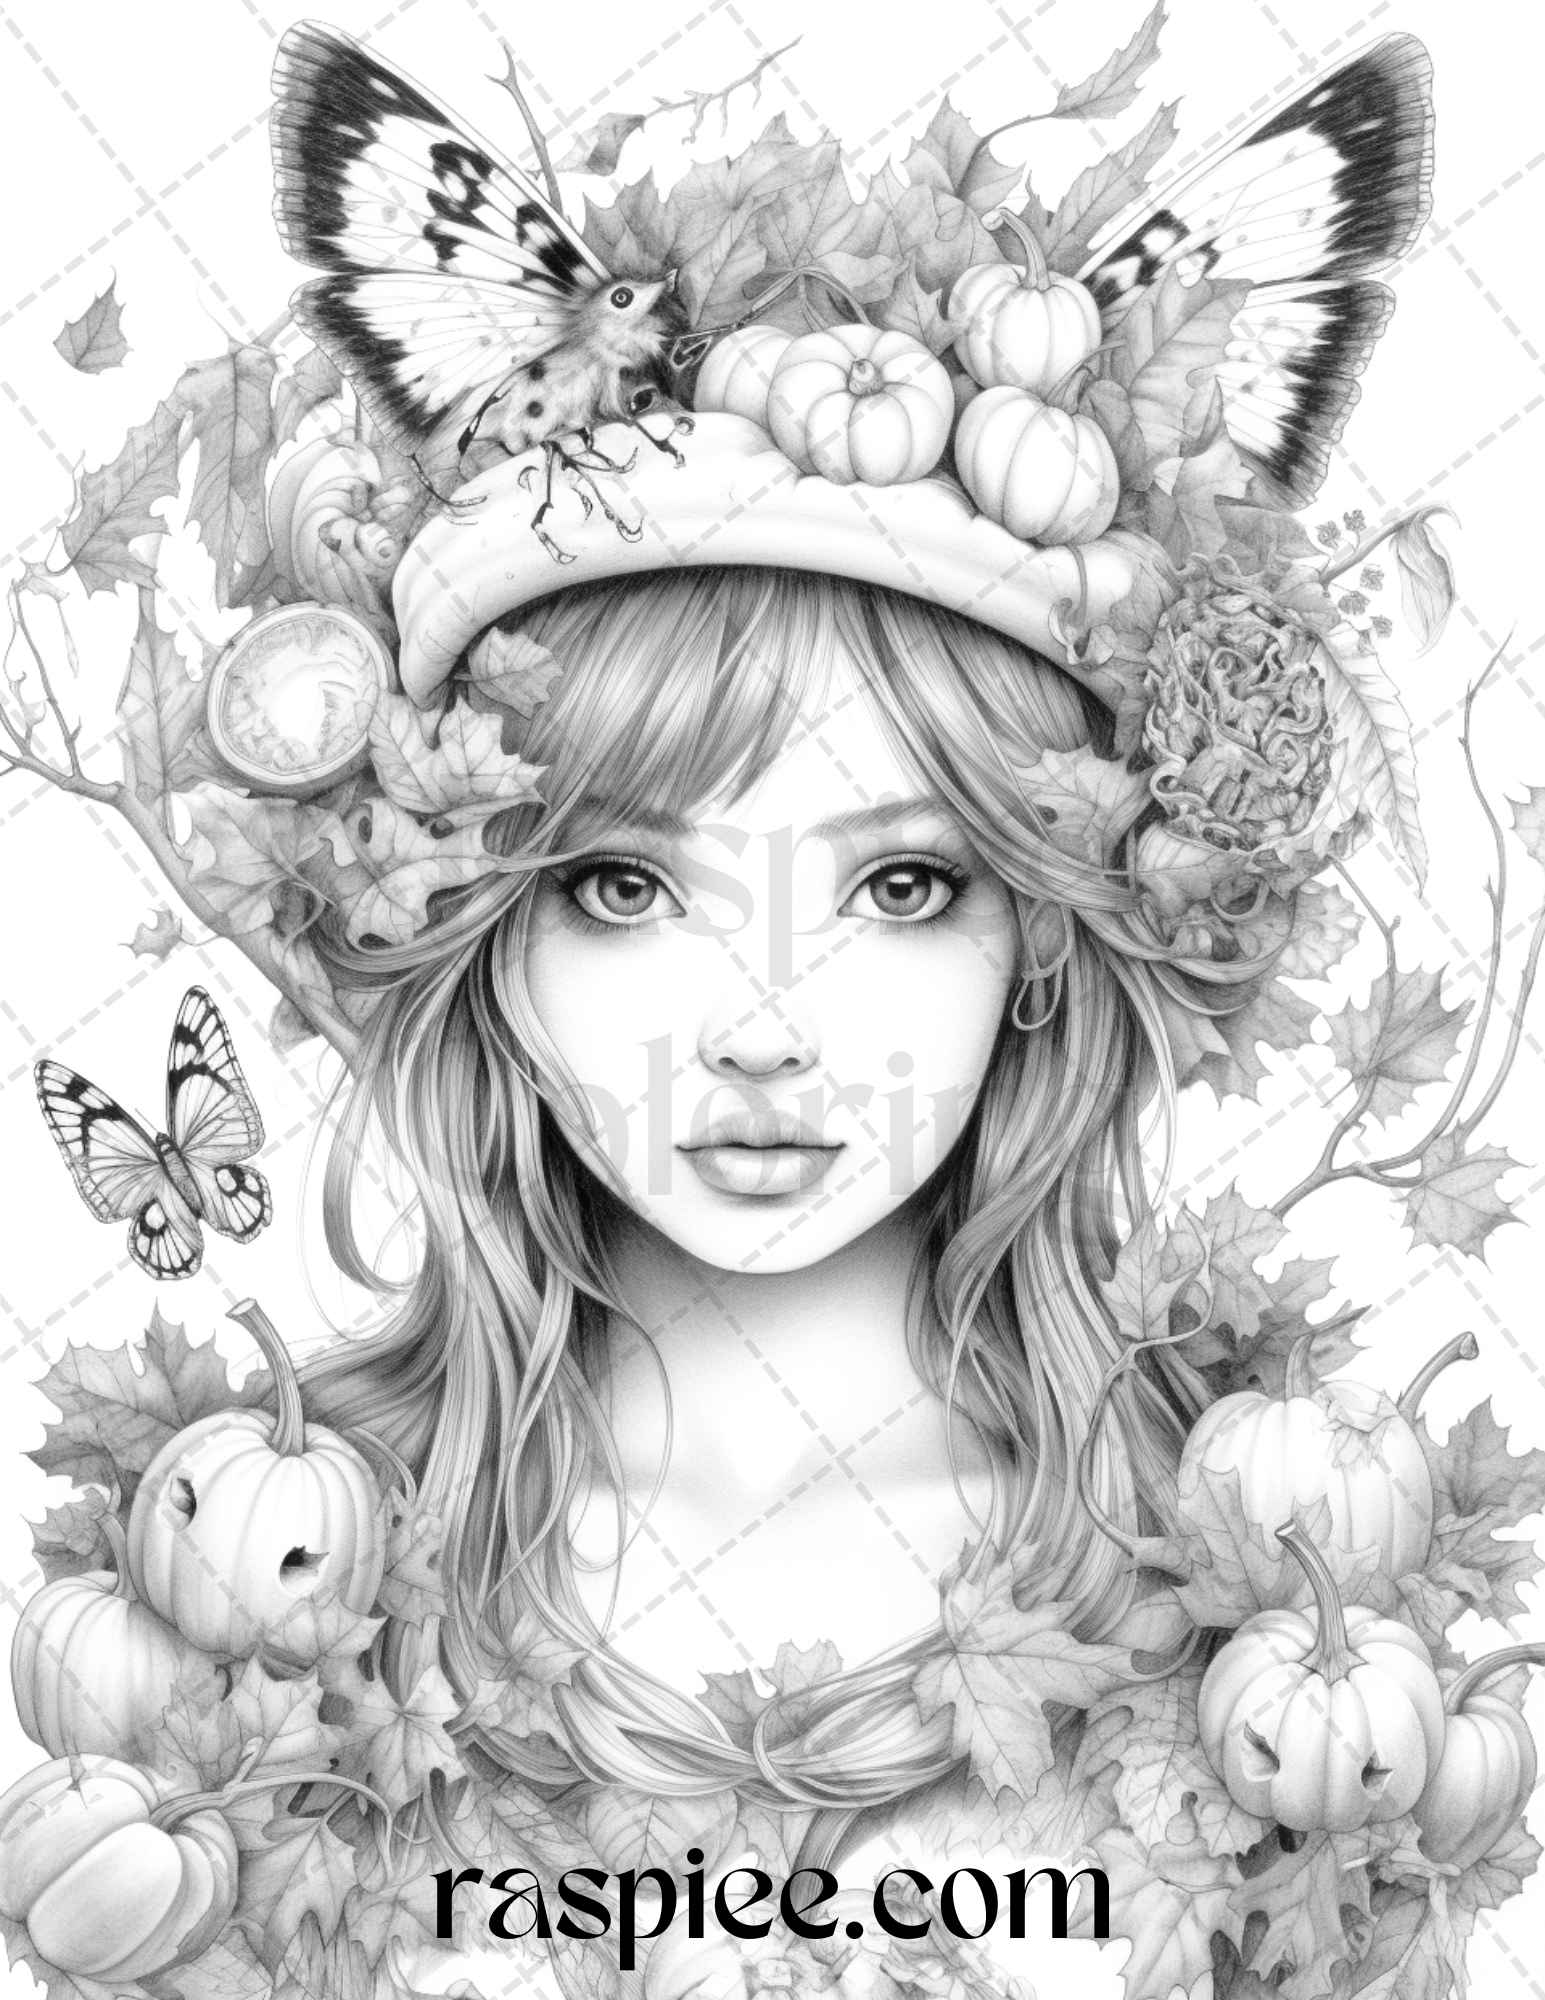 40 Pumpkin Fairy Girls Grayscale Coloring Pages Printable for Adults, PDF File Instant Download - raspiee